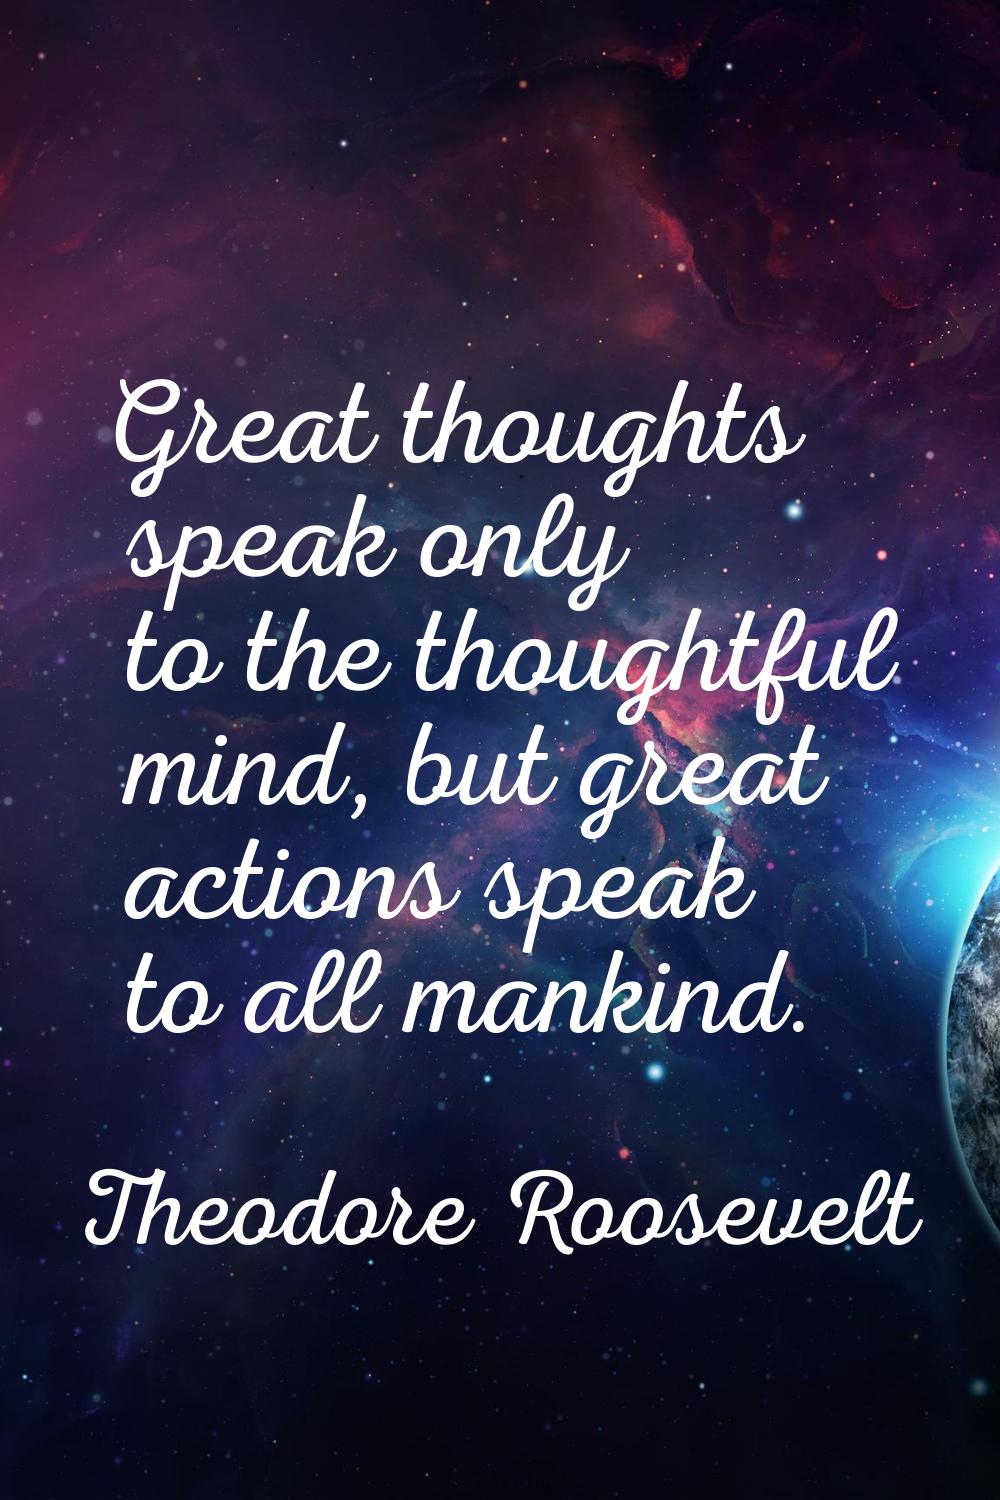 Great thoughts speak only to the thoughtful mind, but great actions speak to all mankind.